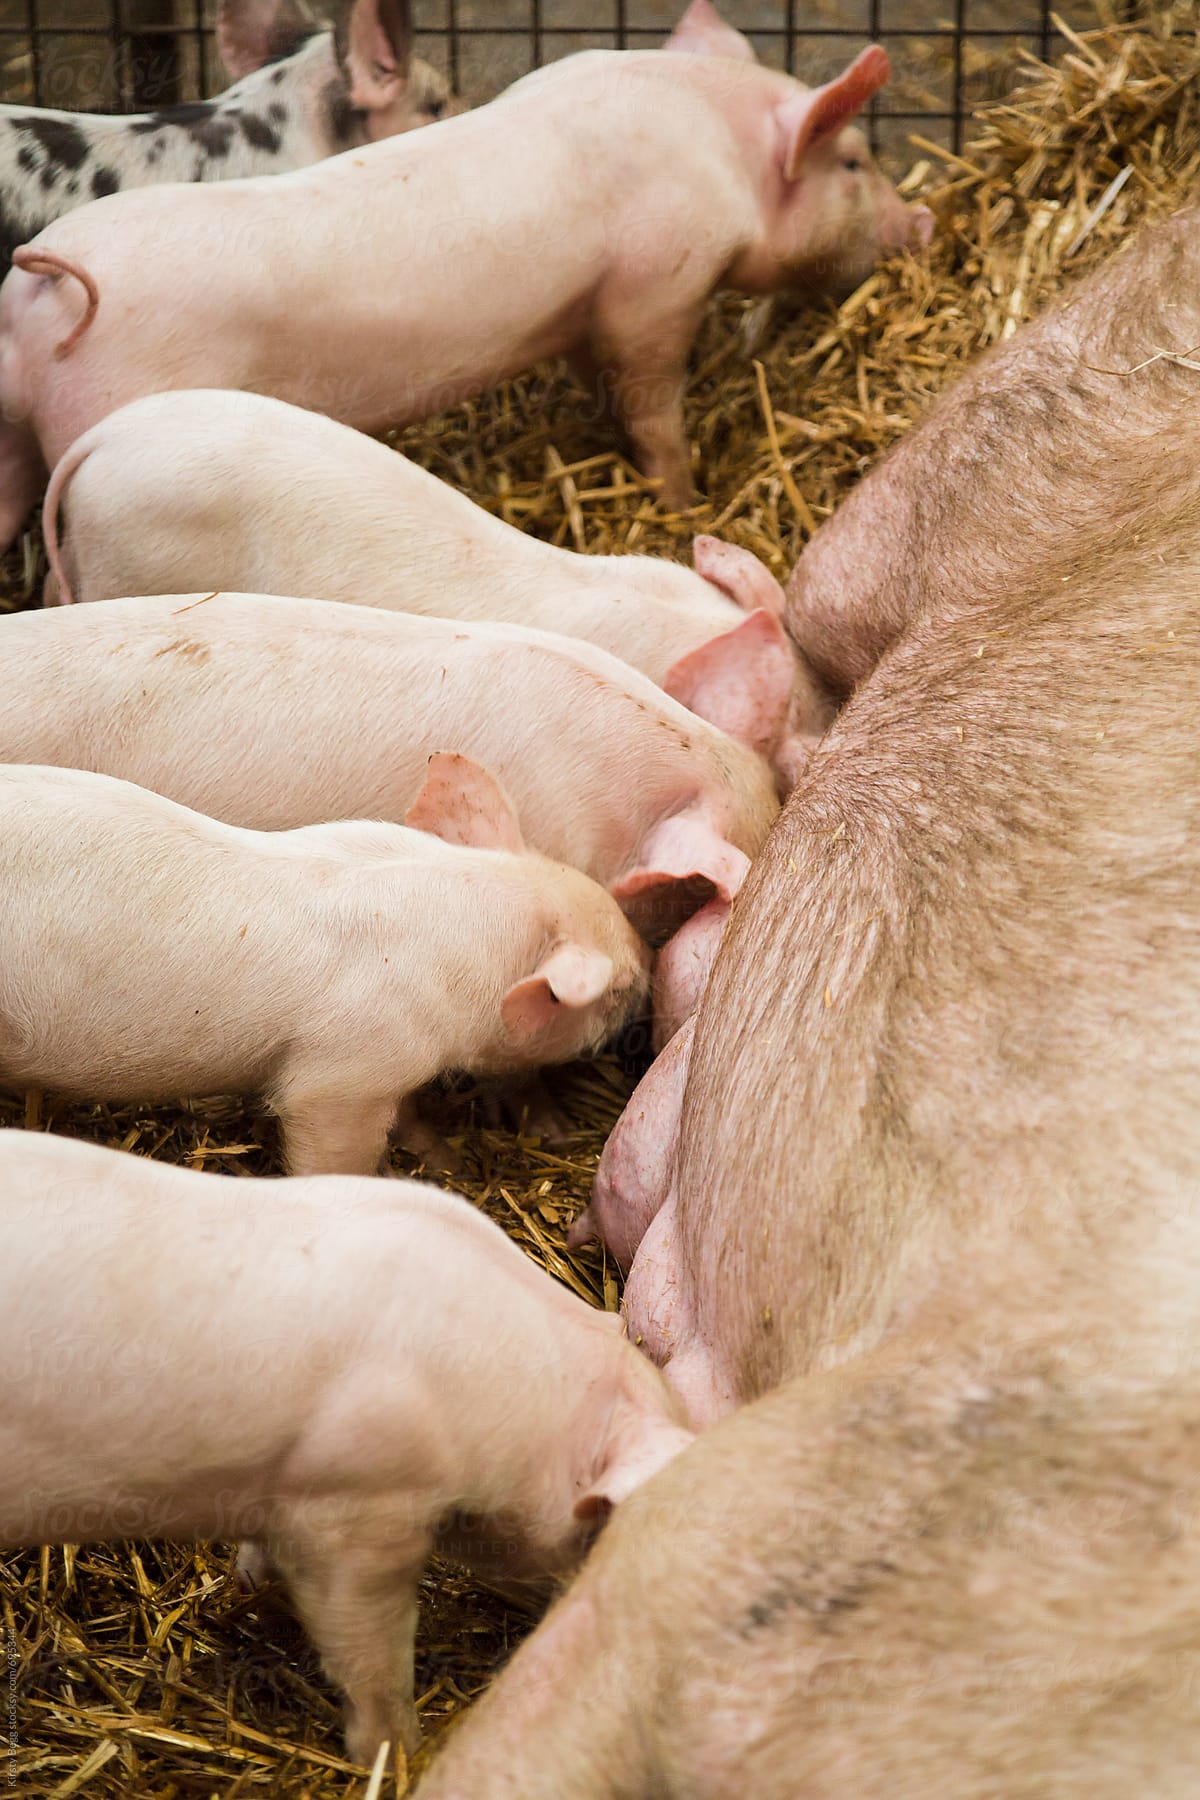 Piglets suckling from mother sow